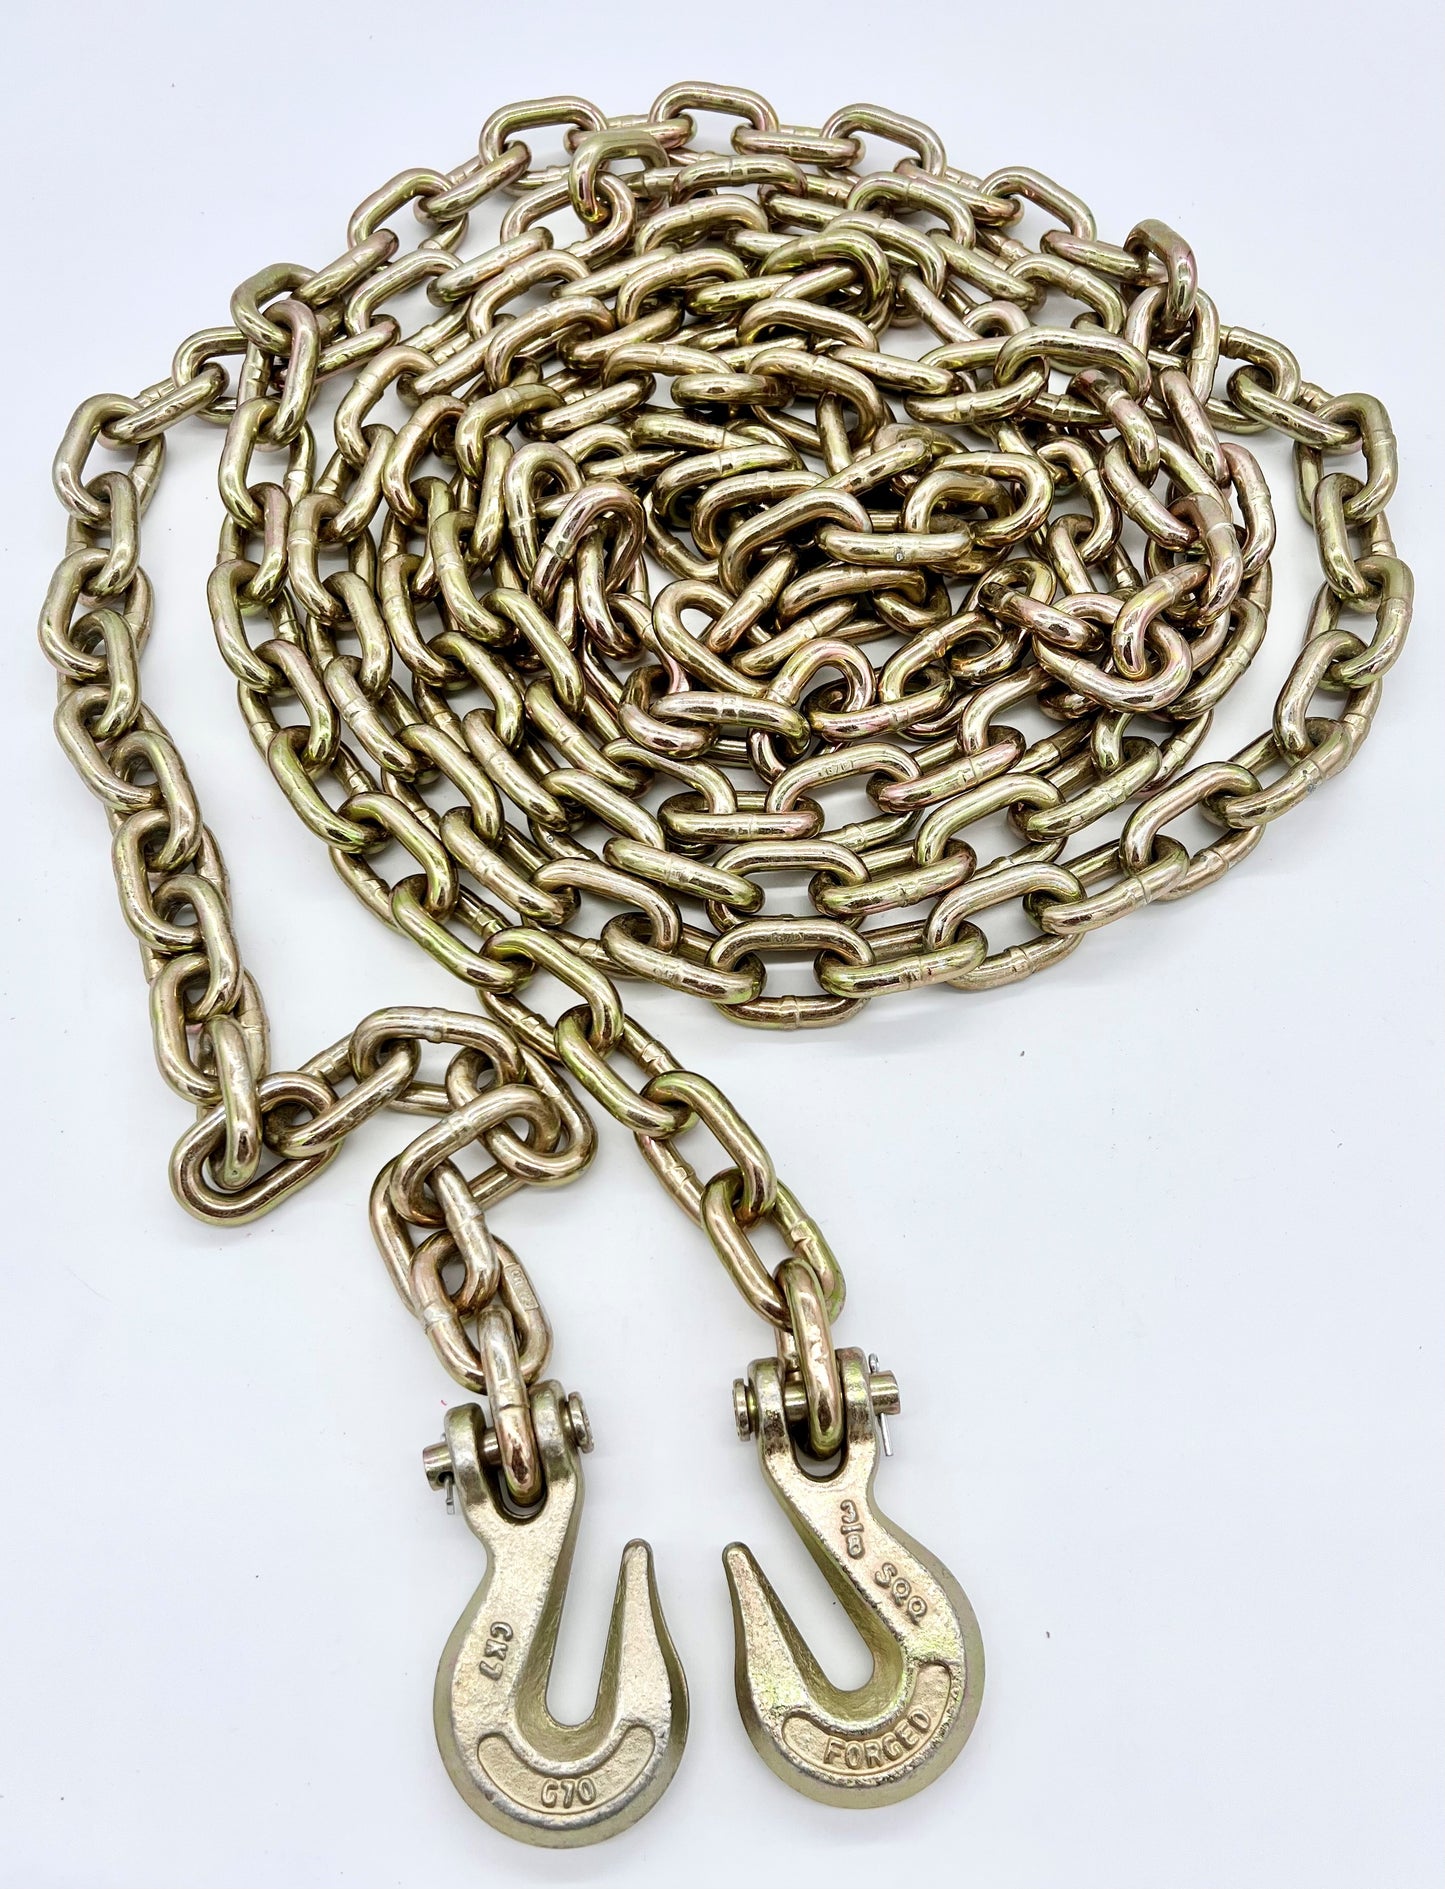 3/8" x 20' G70 Chain With Grab Hooks - TELLICO Branded - Retail Ready